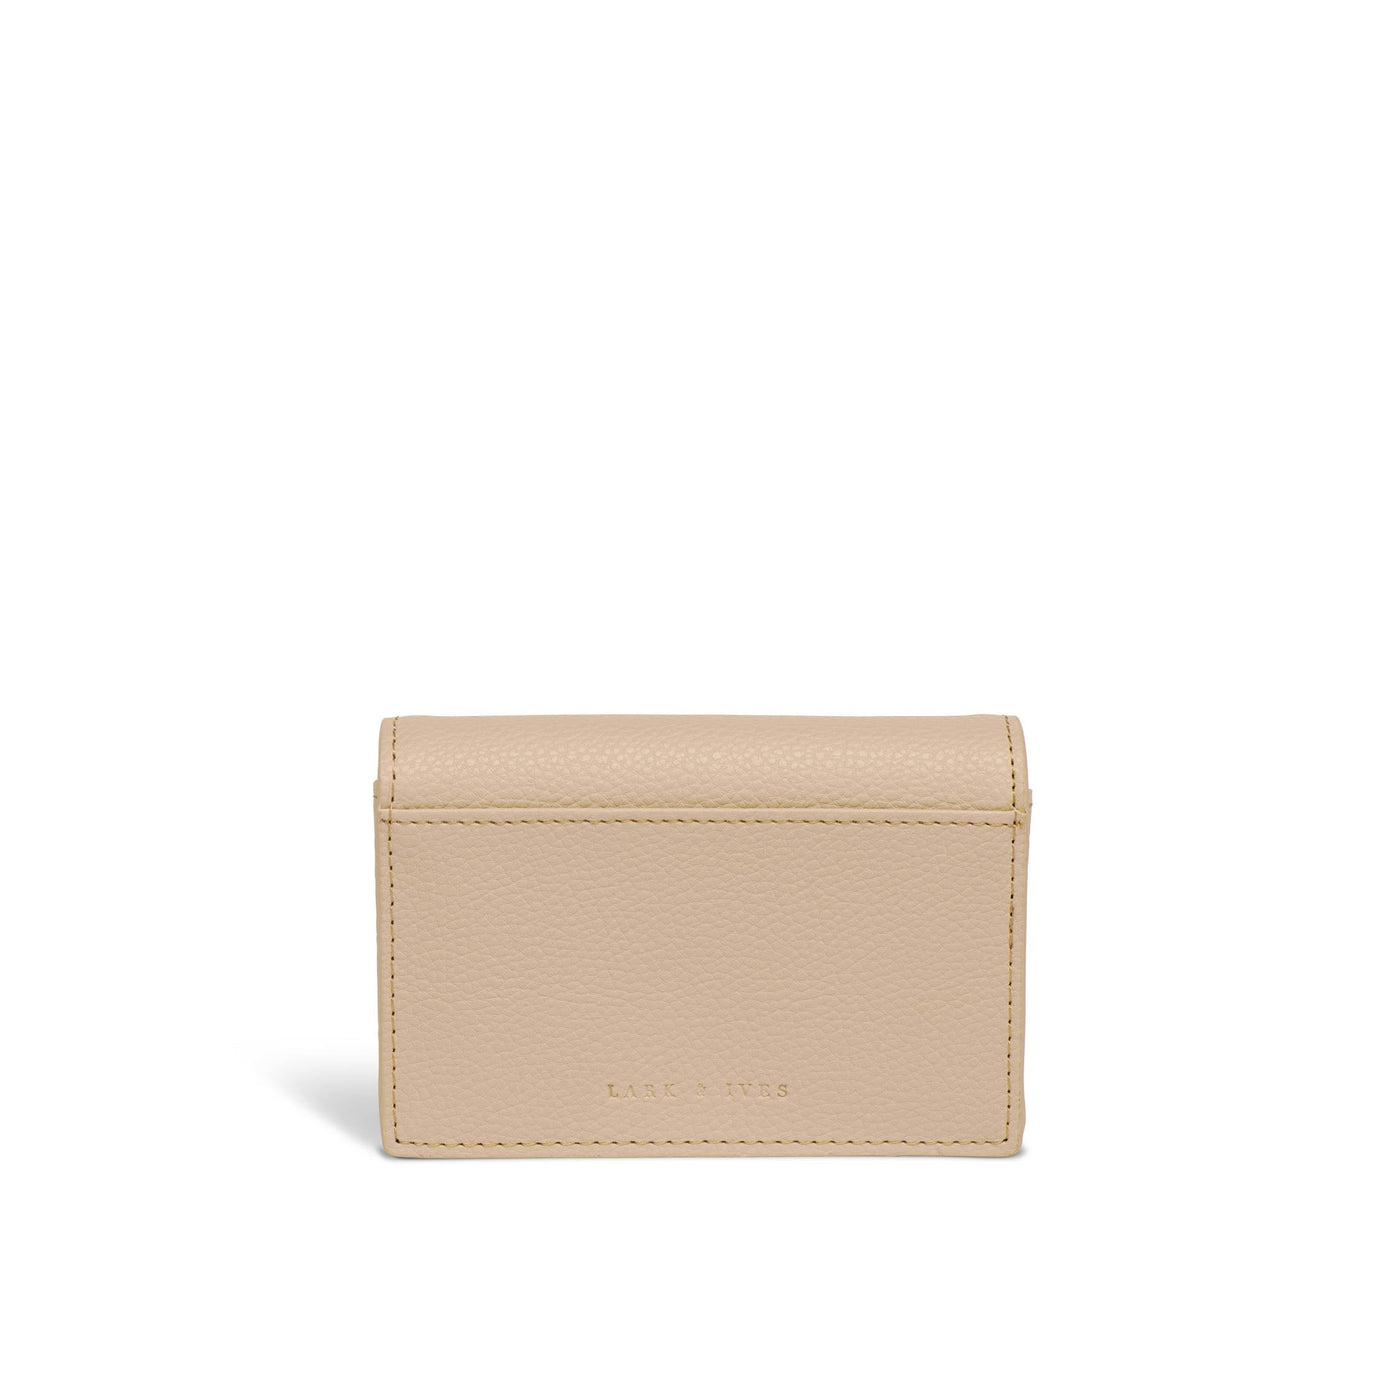 Lark and Ives / Vegan Leather Accessories / Small Accessories / Wallet / Mini Wallet / Card Case / Card Holder / Button snap closure / Fold Wallet / Tan